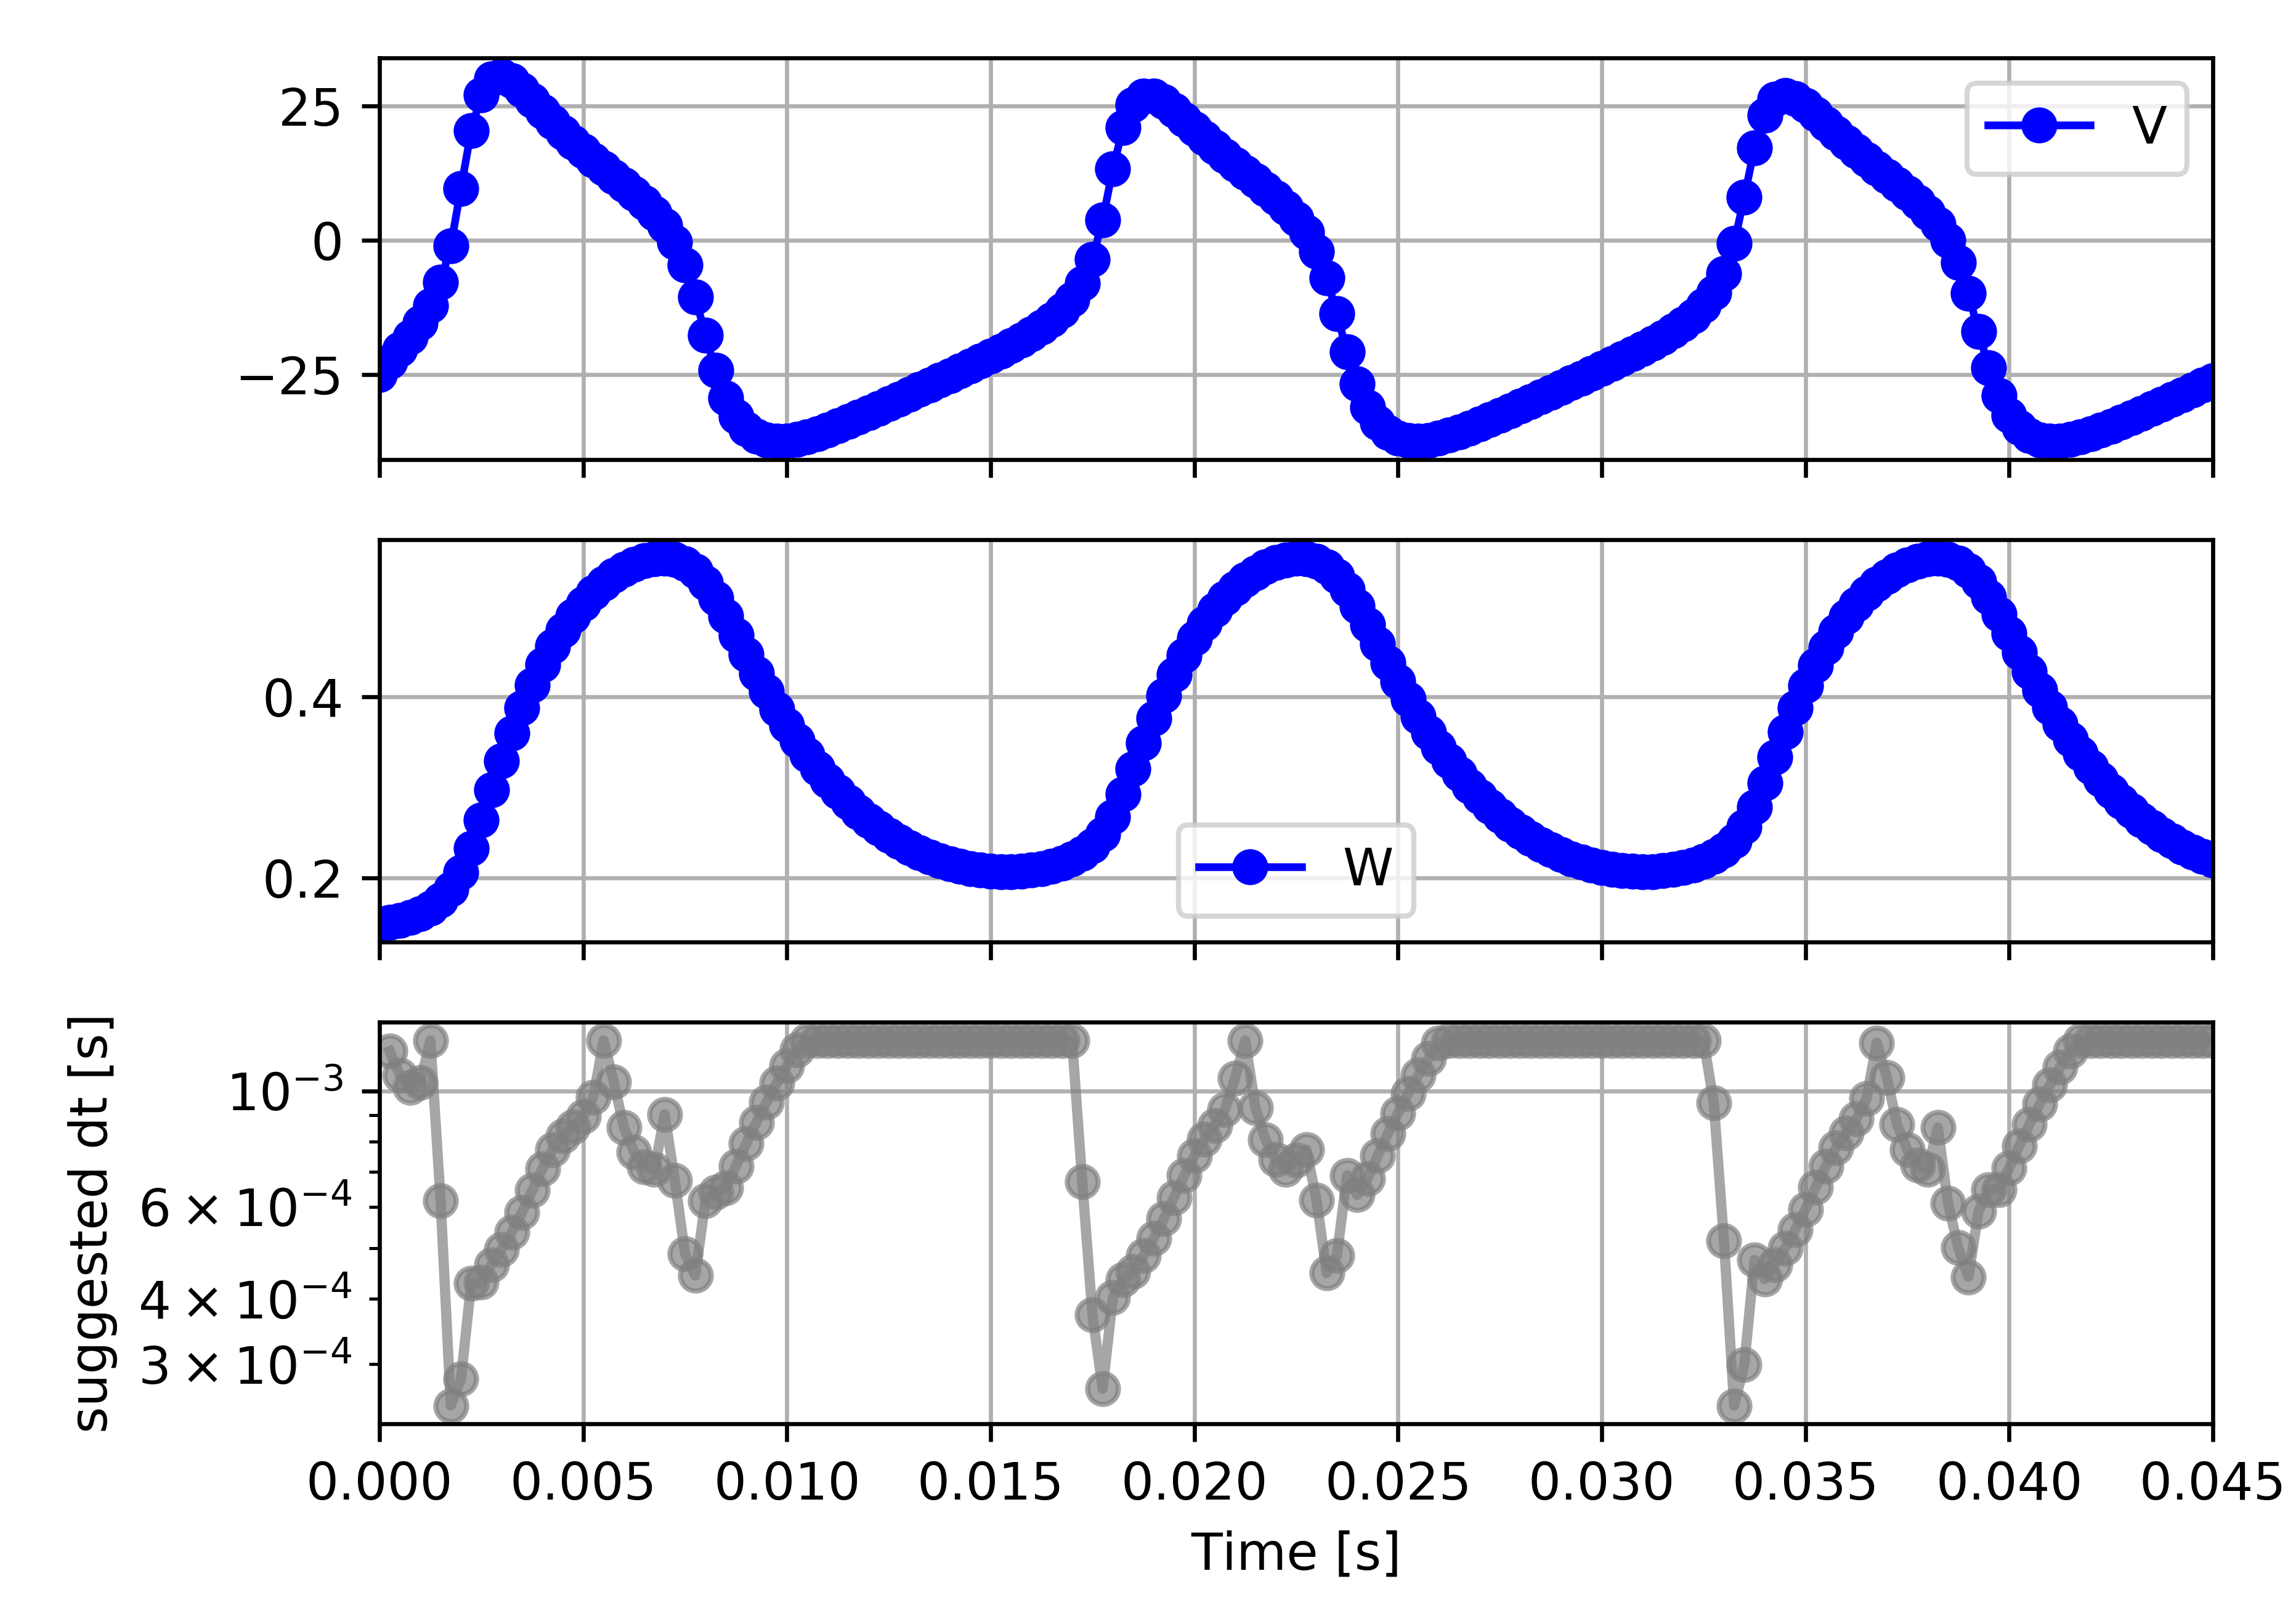 timeseries plots of V, W, and recommended timestep